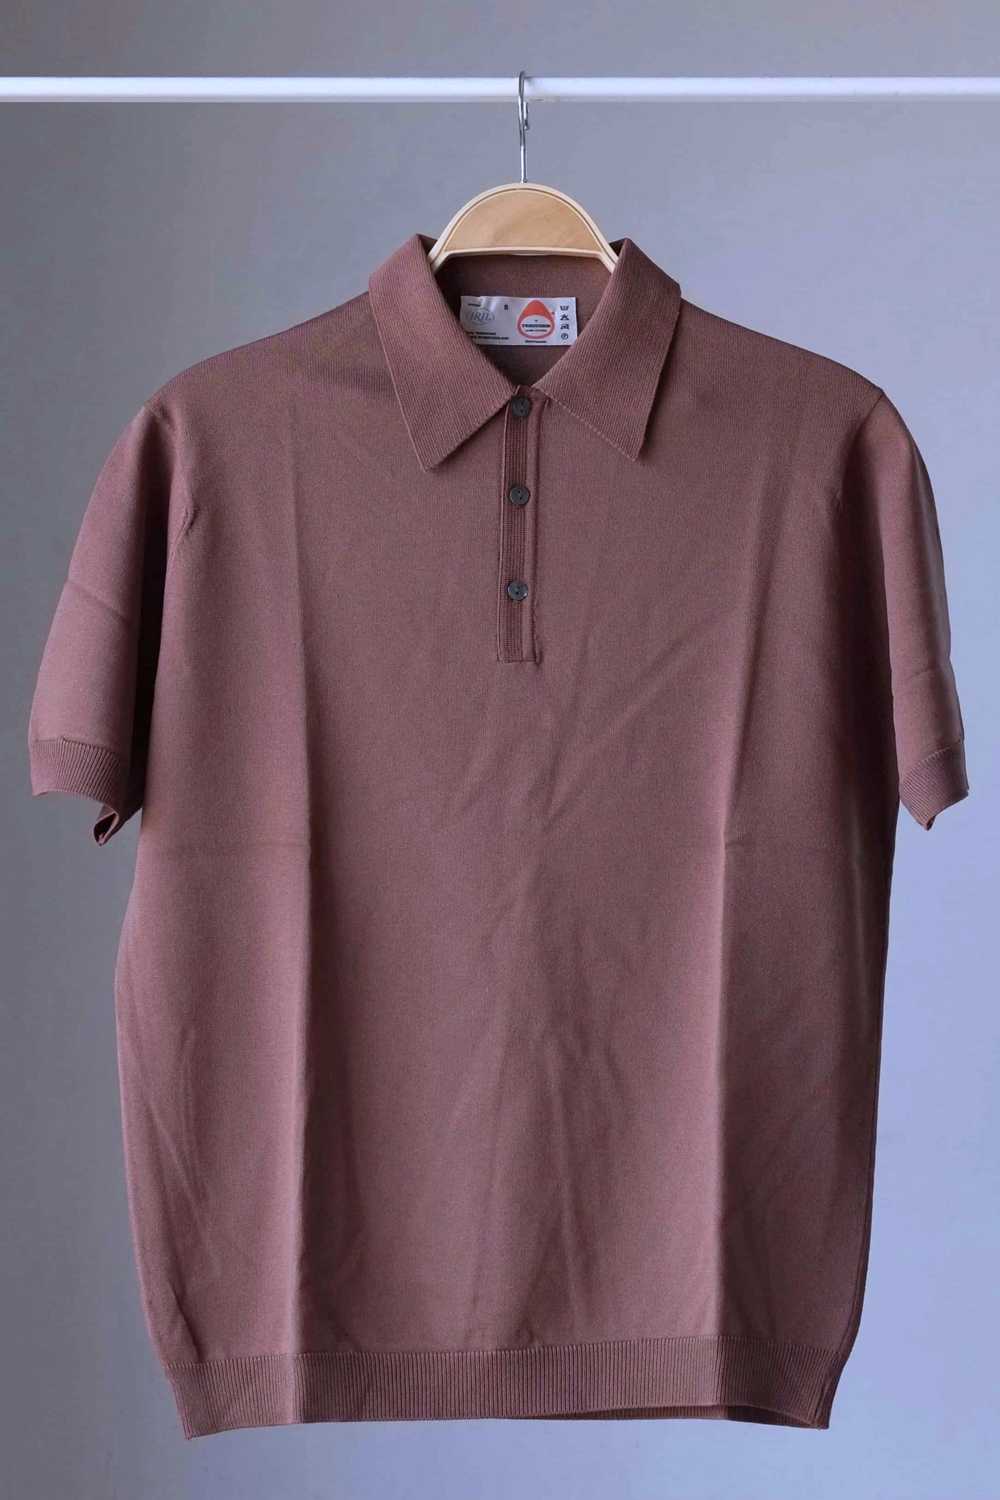 IRIL 70's Knitted Polo Shirt - image 8